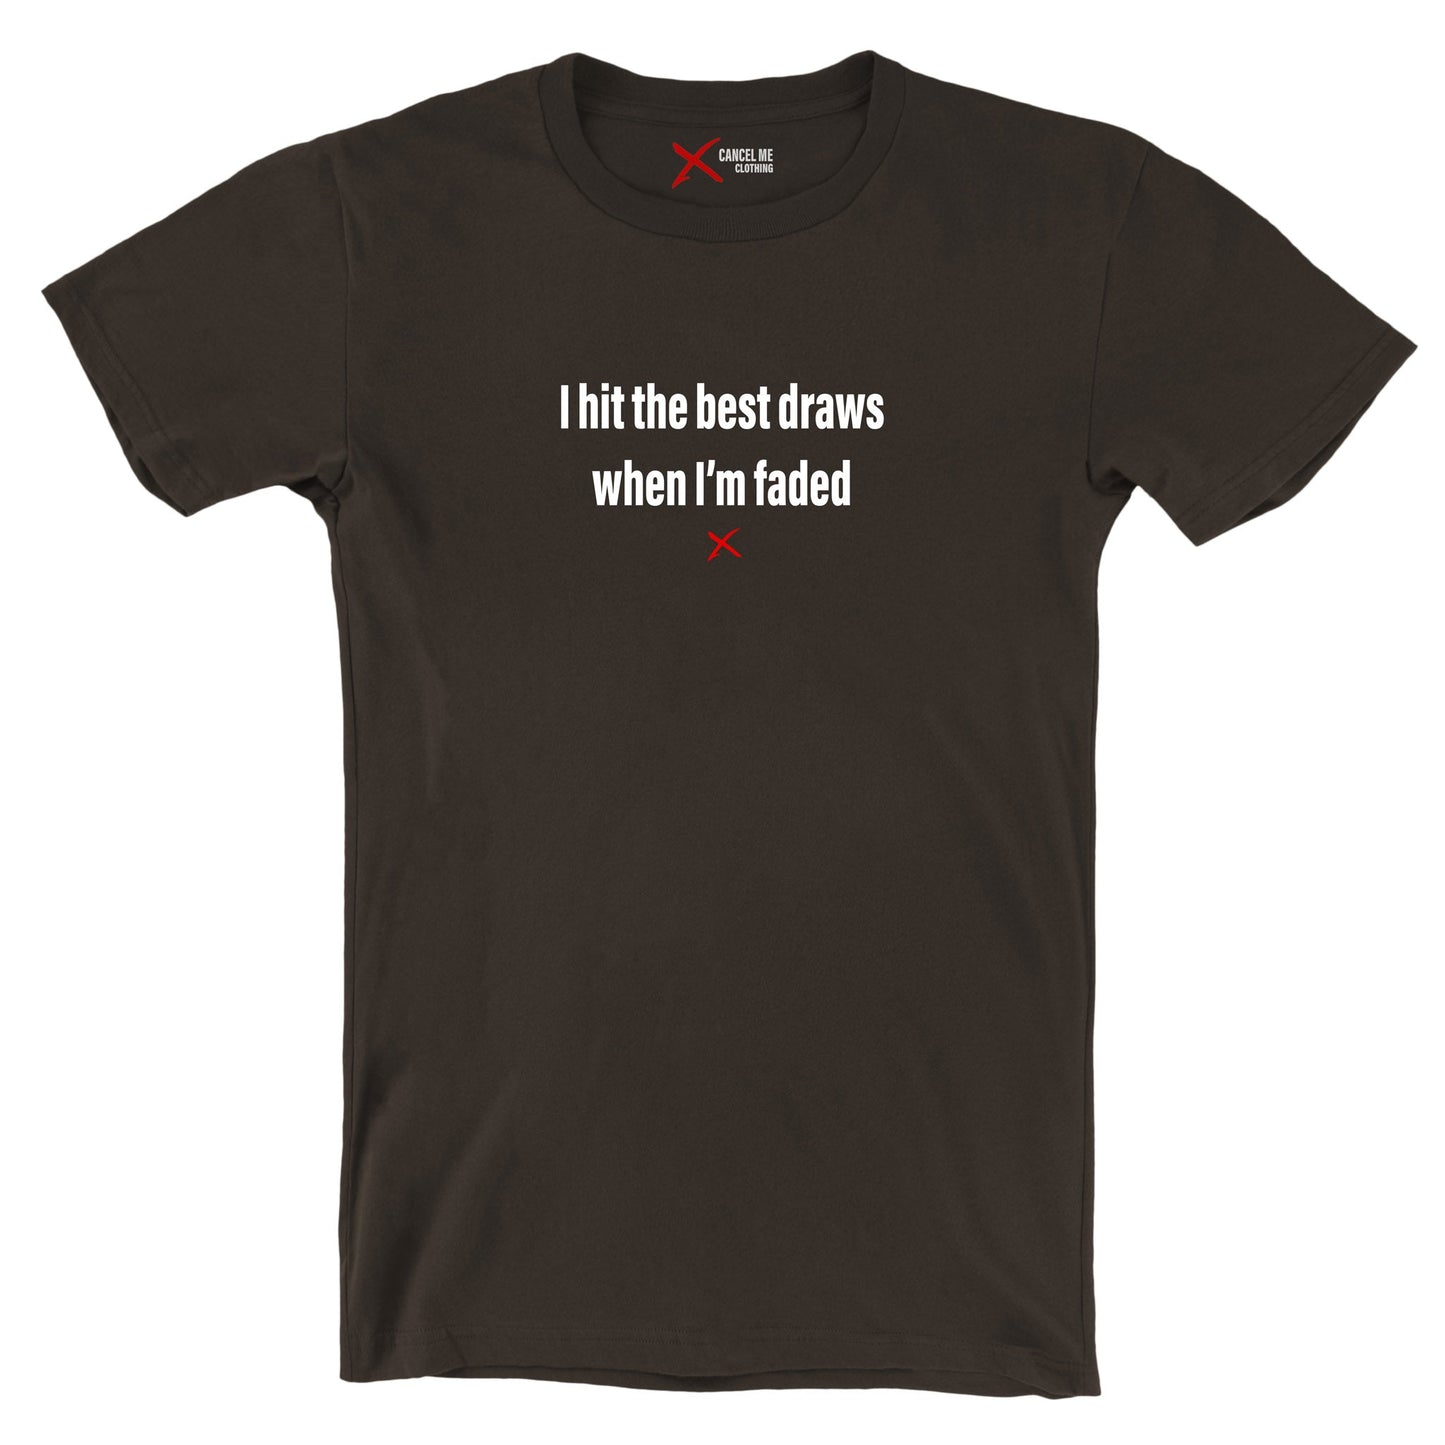 I hit the best draws when I'm faded - Shirt